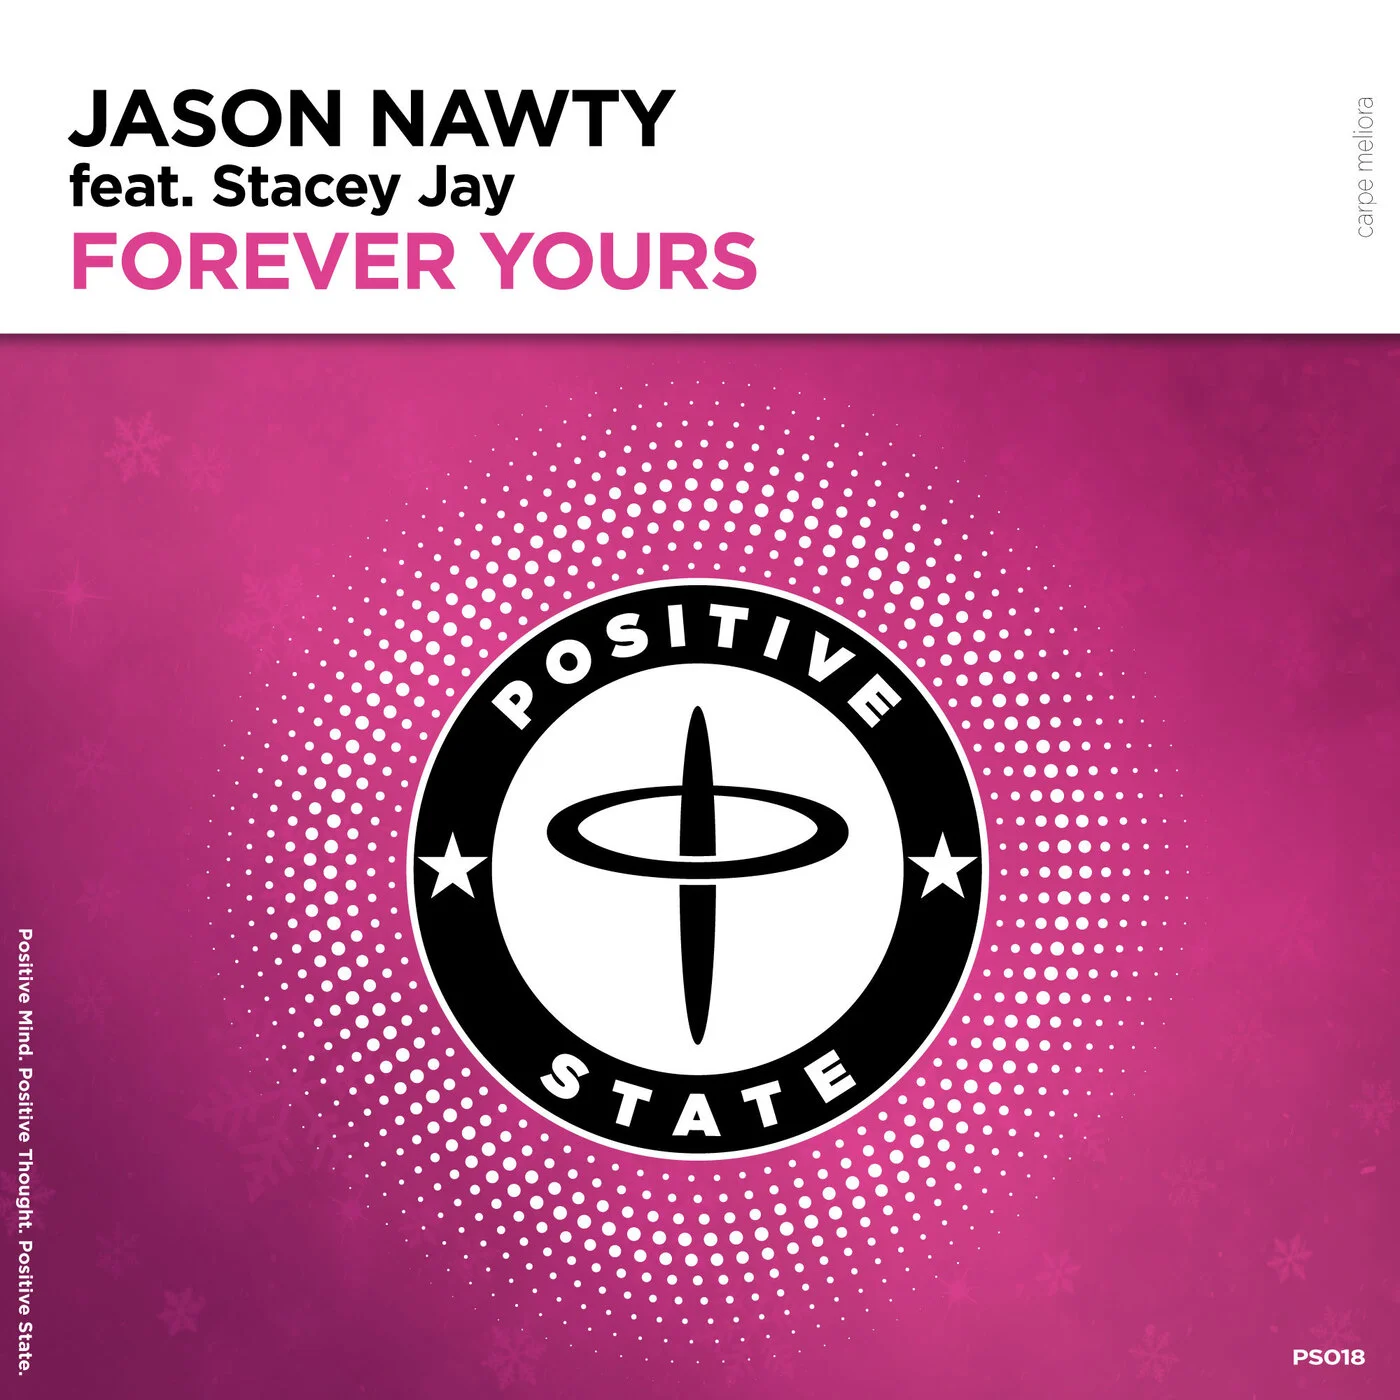 Jason Nawty Feat. Stacey Jay - Forever Yours (Extended Mix)